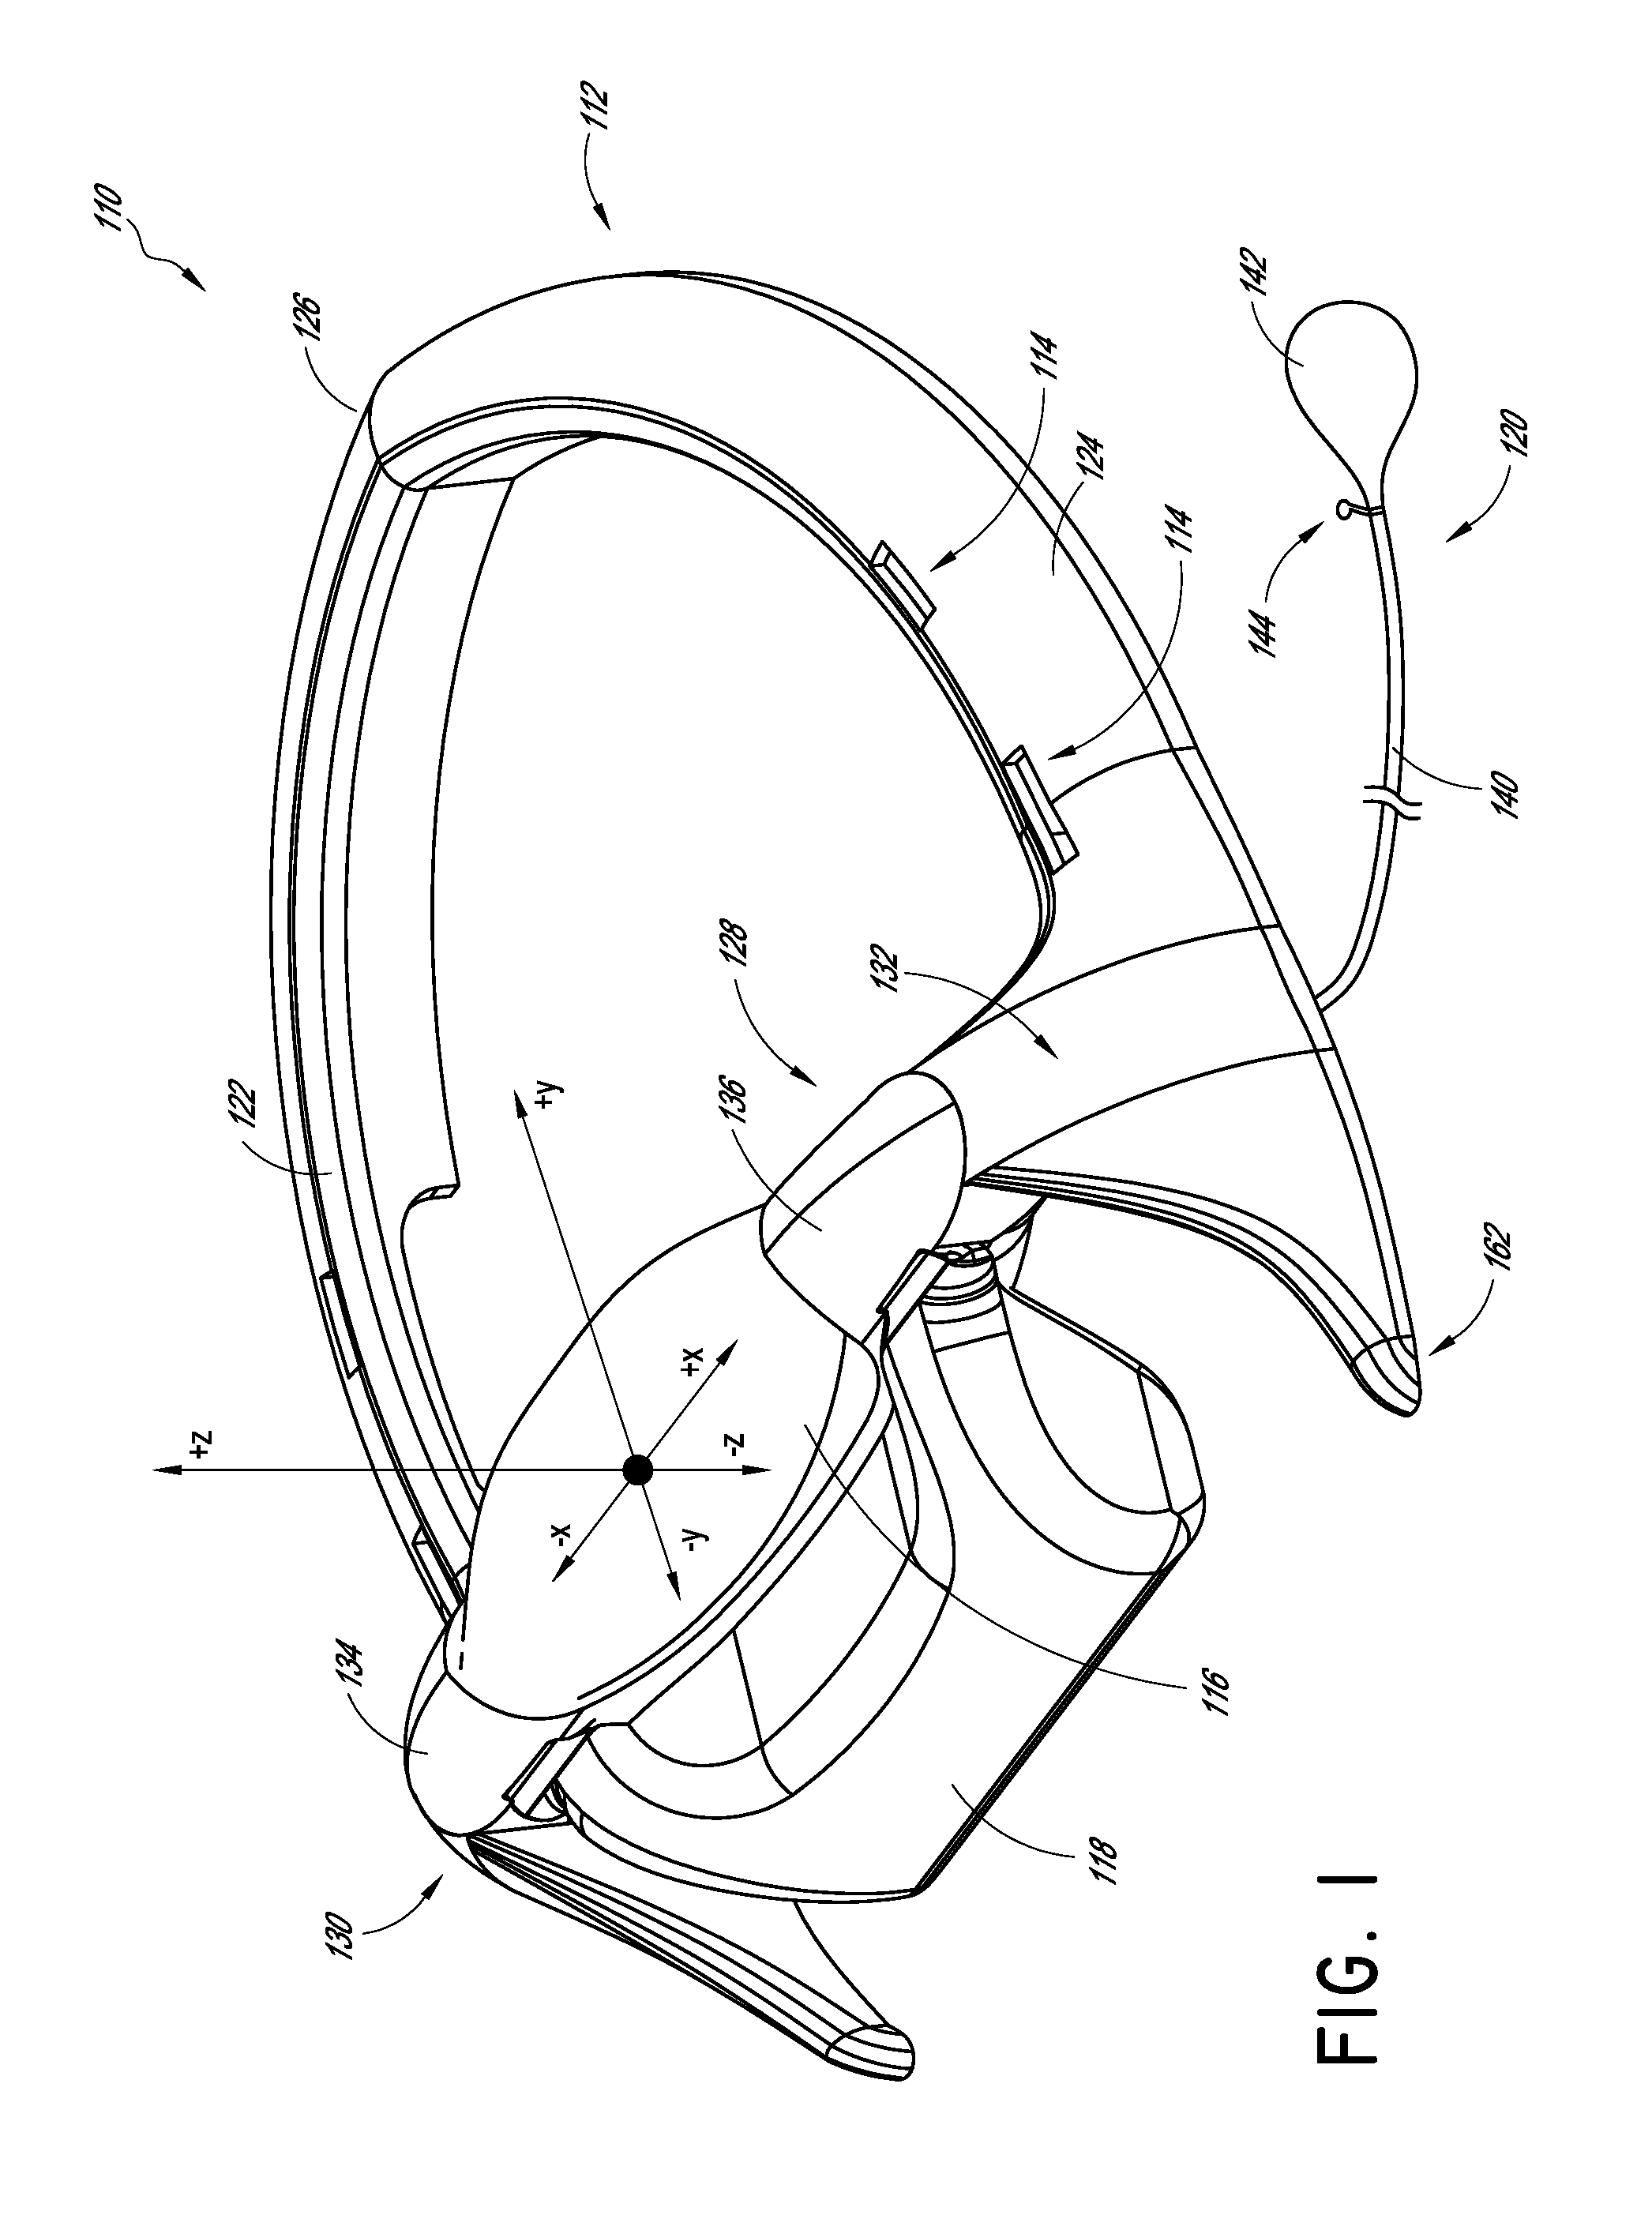 Systems and methods for decompression and elliptical traction of the cervical and thoracic spine